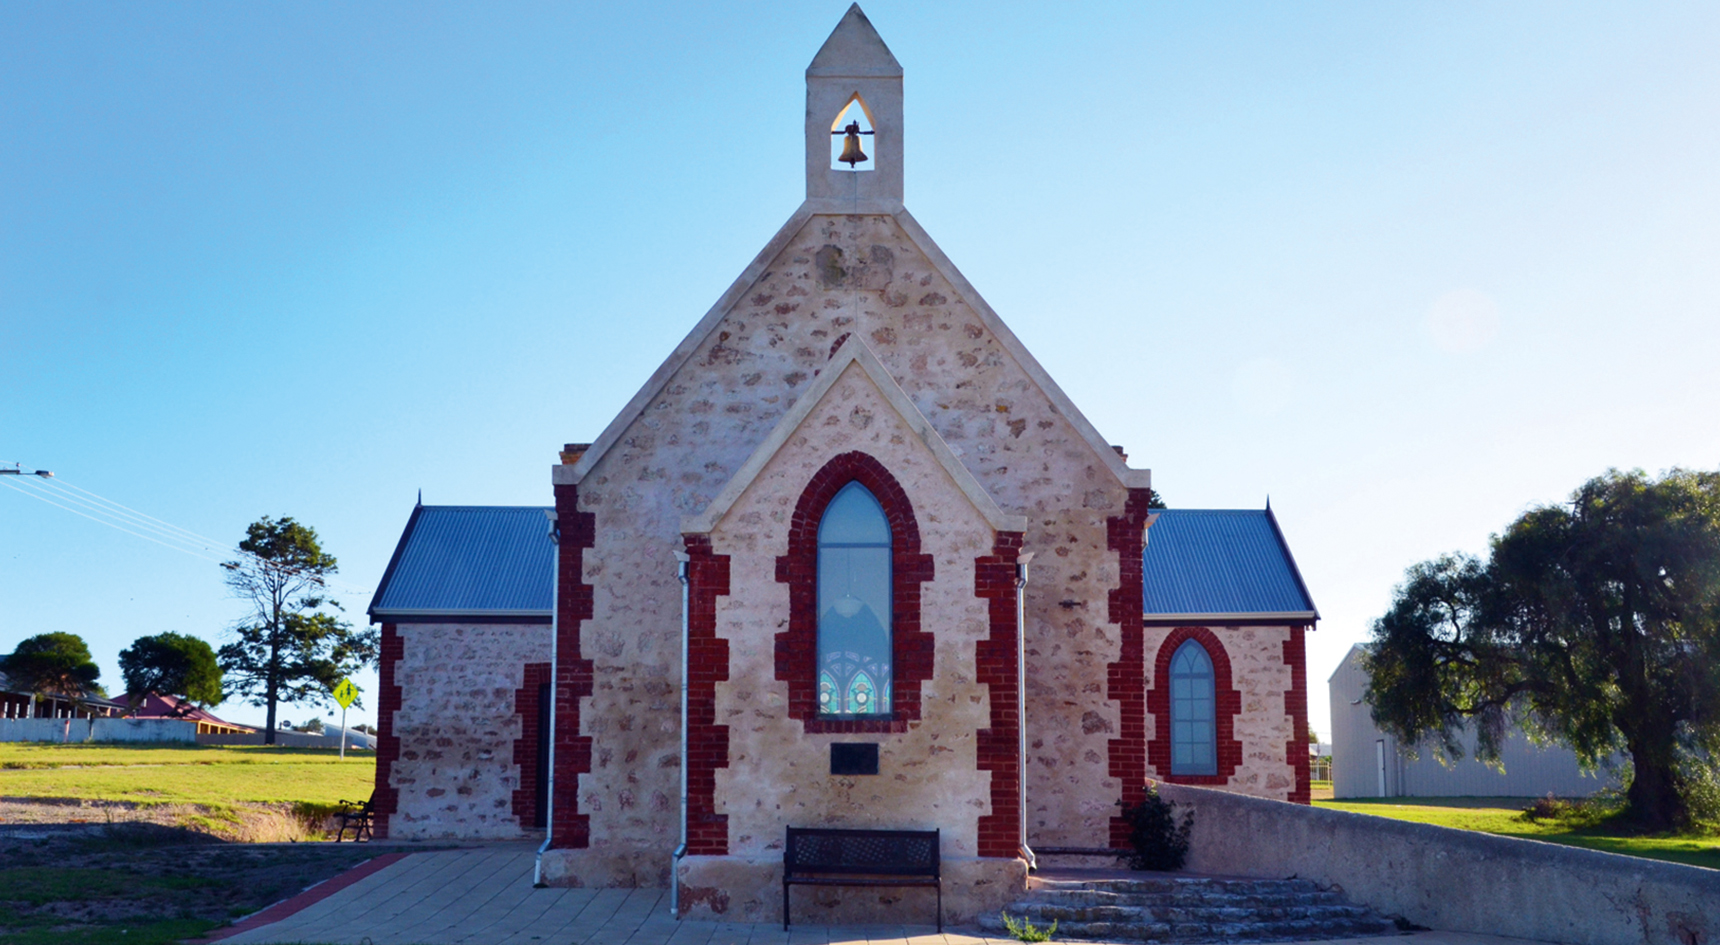 The museum and history church at Raukkan, South Australia near the Coorong National Park